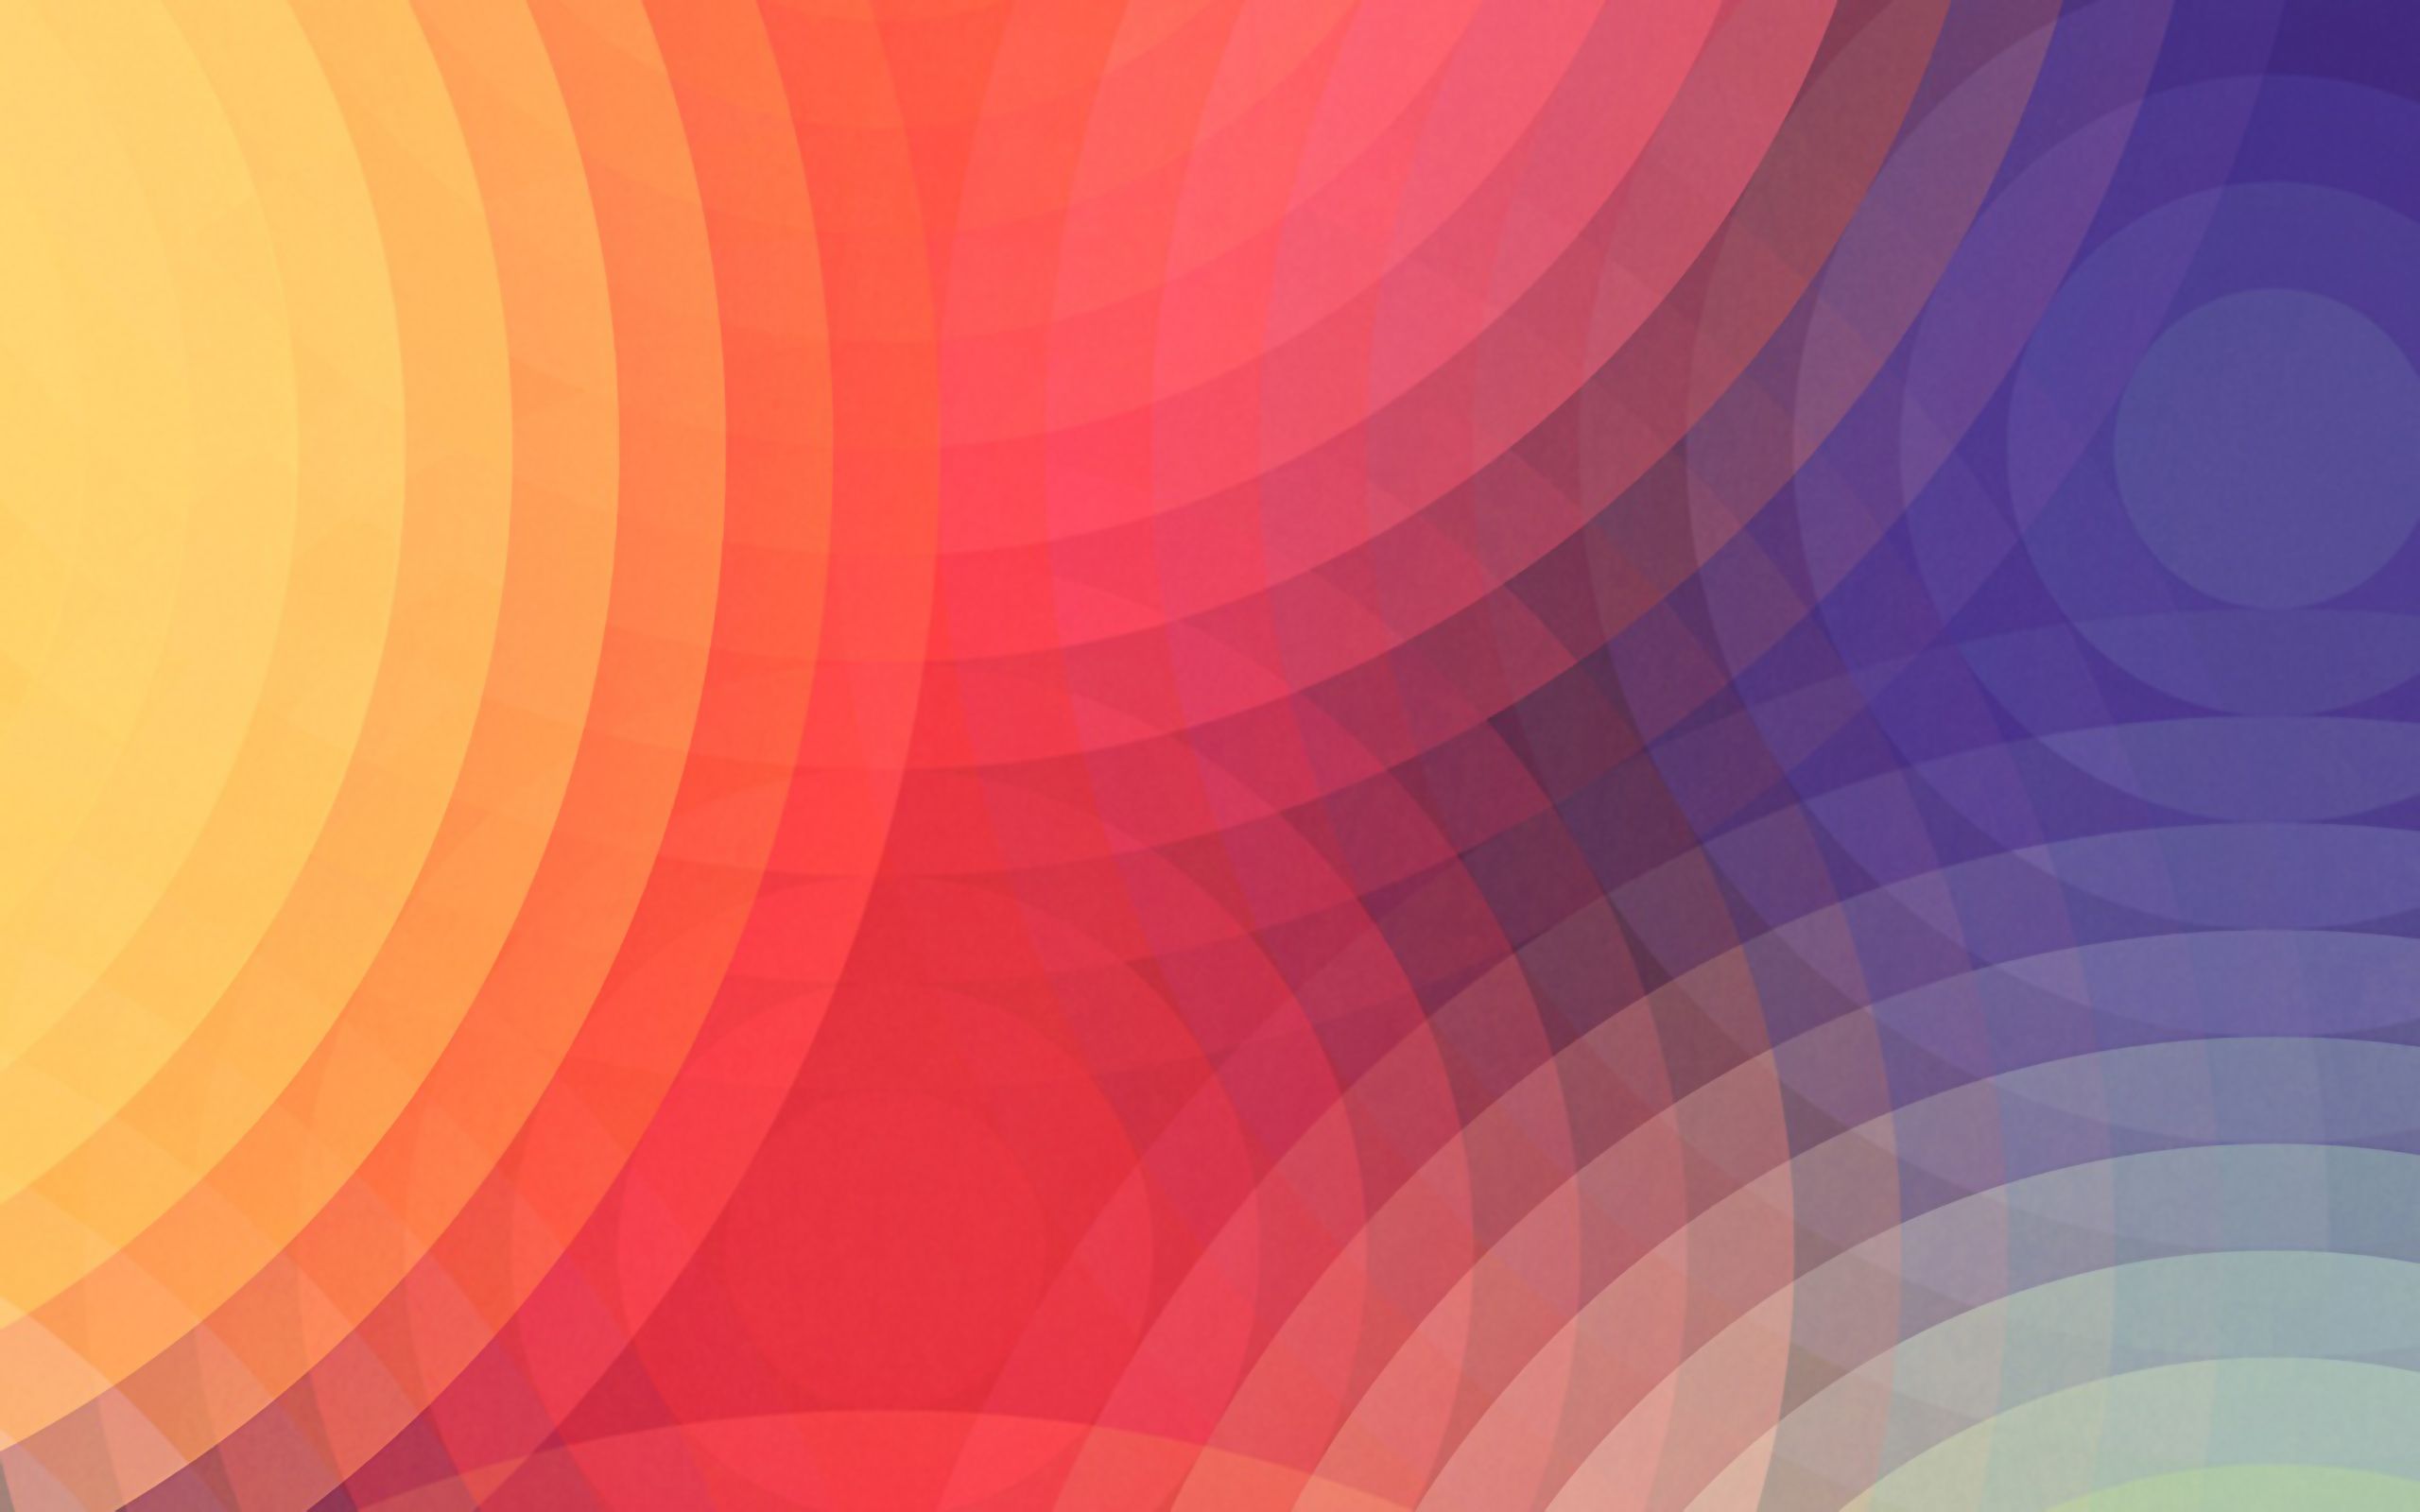 Image For Android Jelly Bean Wallpaper HD Colors And Design